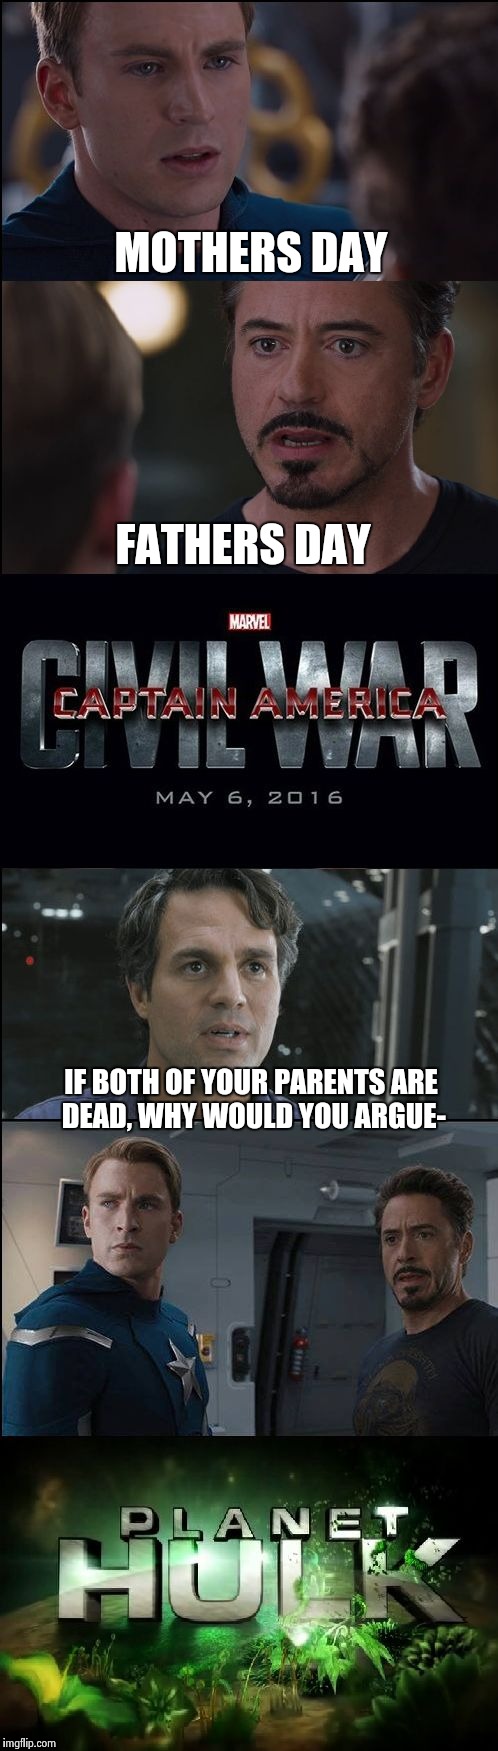 Civil War/Planet Hulk | MOTHERS DAY; FATHERS DAY; IF BOTH OF YOUR PARENTS ARE DEAD, WHY WOULD YOU ARGUE- | image tagged in civil war/planet hulk | made w/ Imgflip meme maker